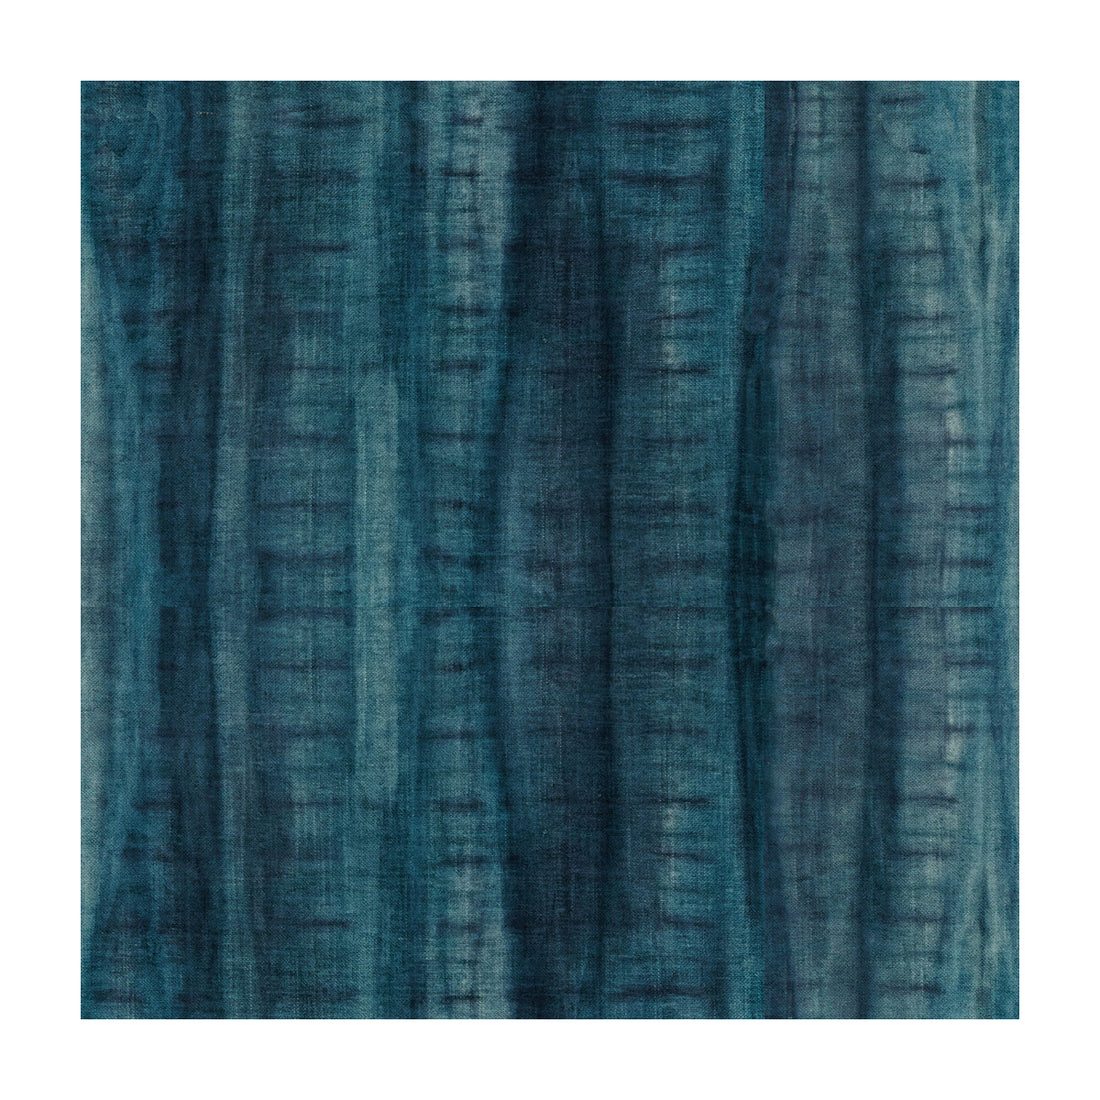 Kravet Couture fabric in tie dye-515 color - pattern TIE DYE.515.0 - by Kravet Couture in the Indigo collection